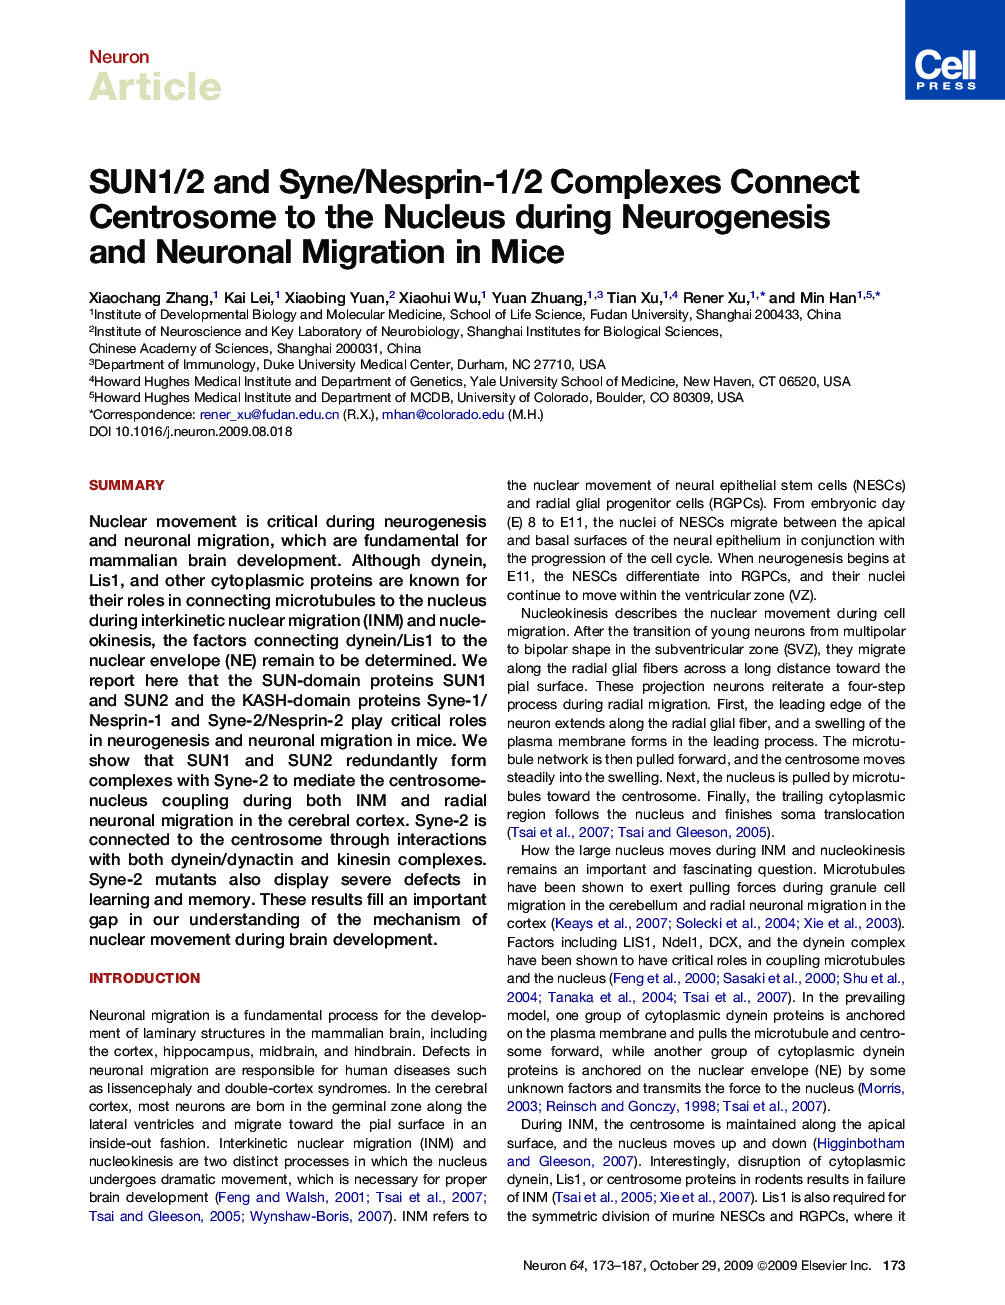 SUN1/2 and Syne/Nesprin-1/2 Complexes Connect Centrosome to the Nucleus during Neurogenesis and Neuronal Migration in Mice